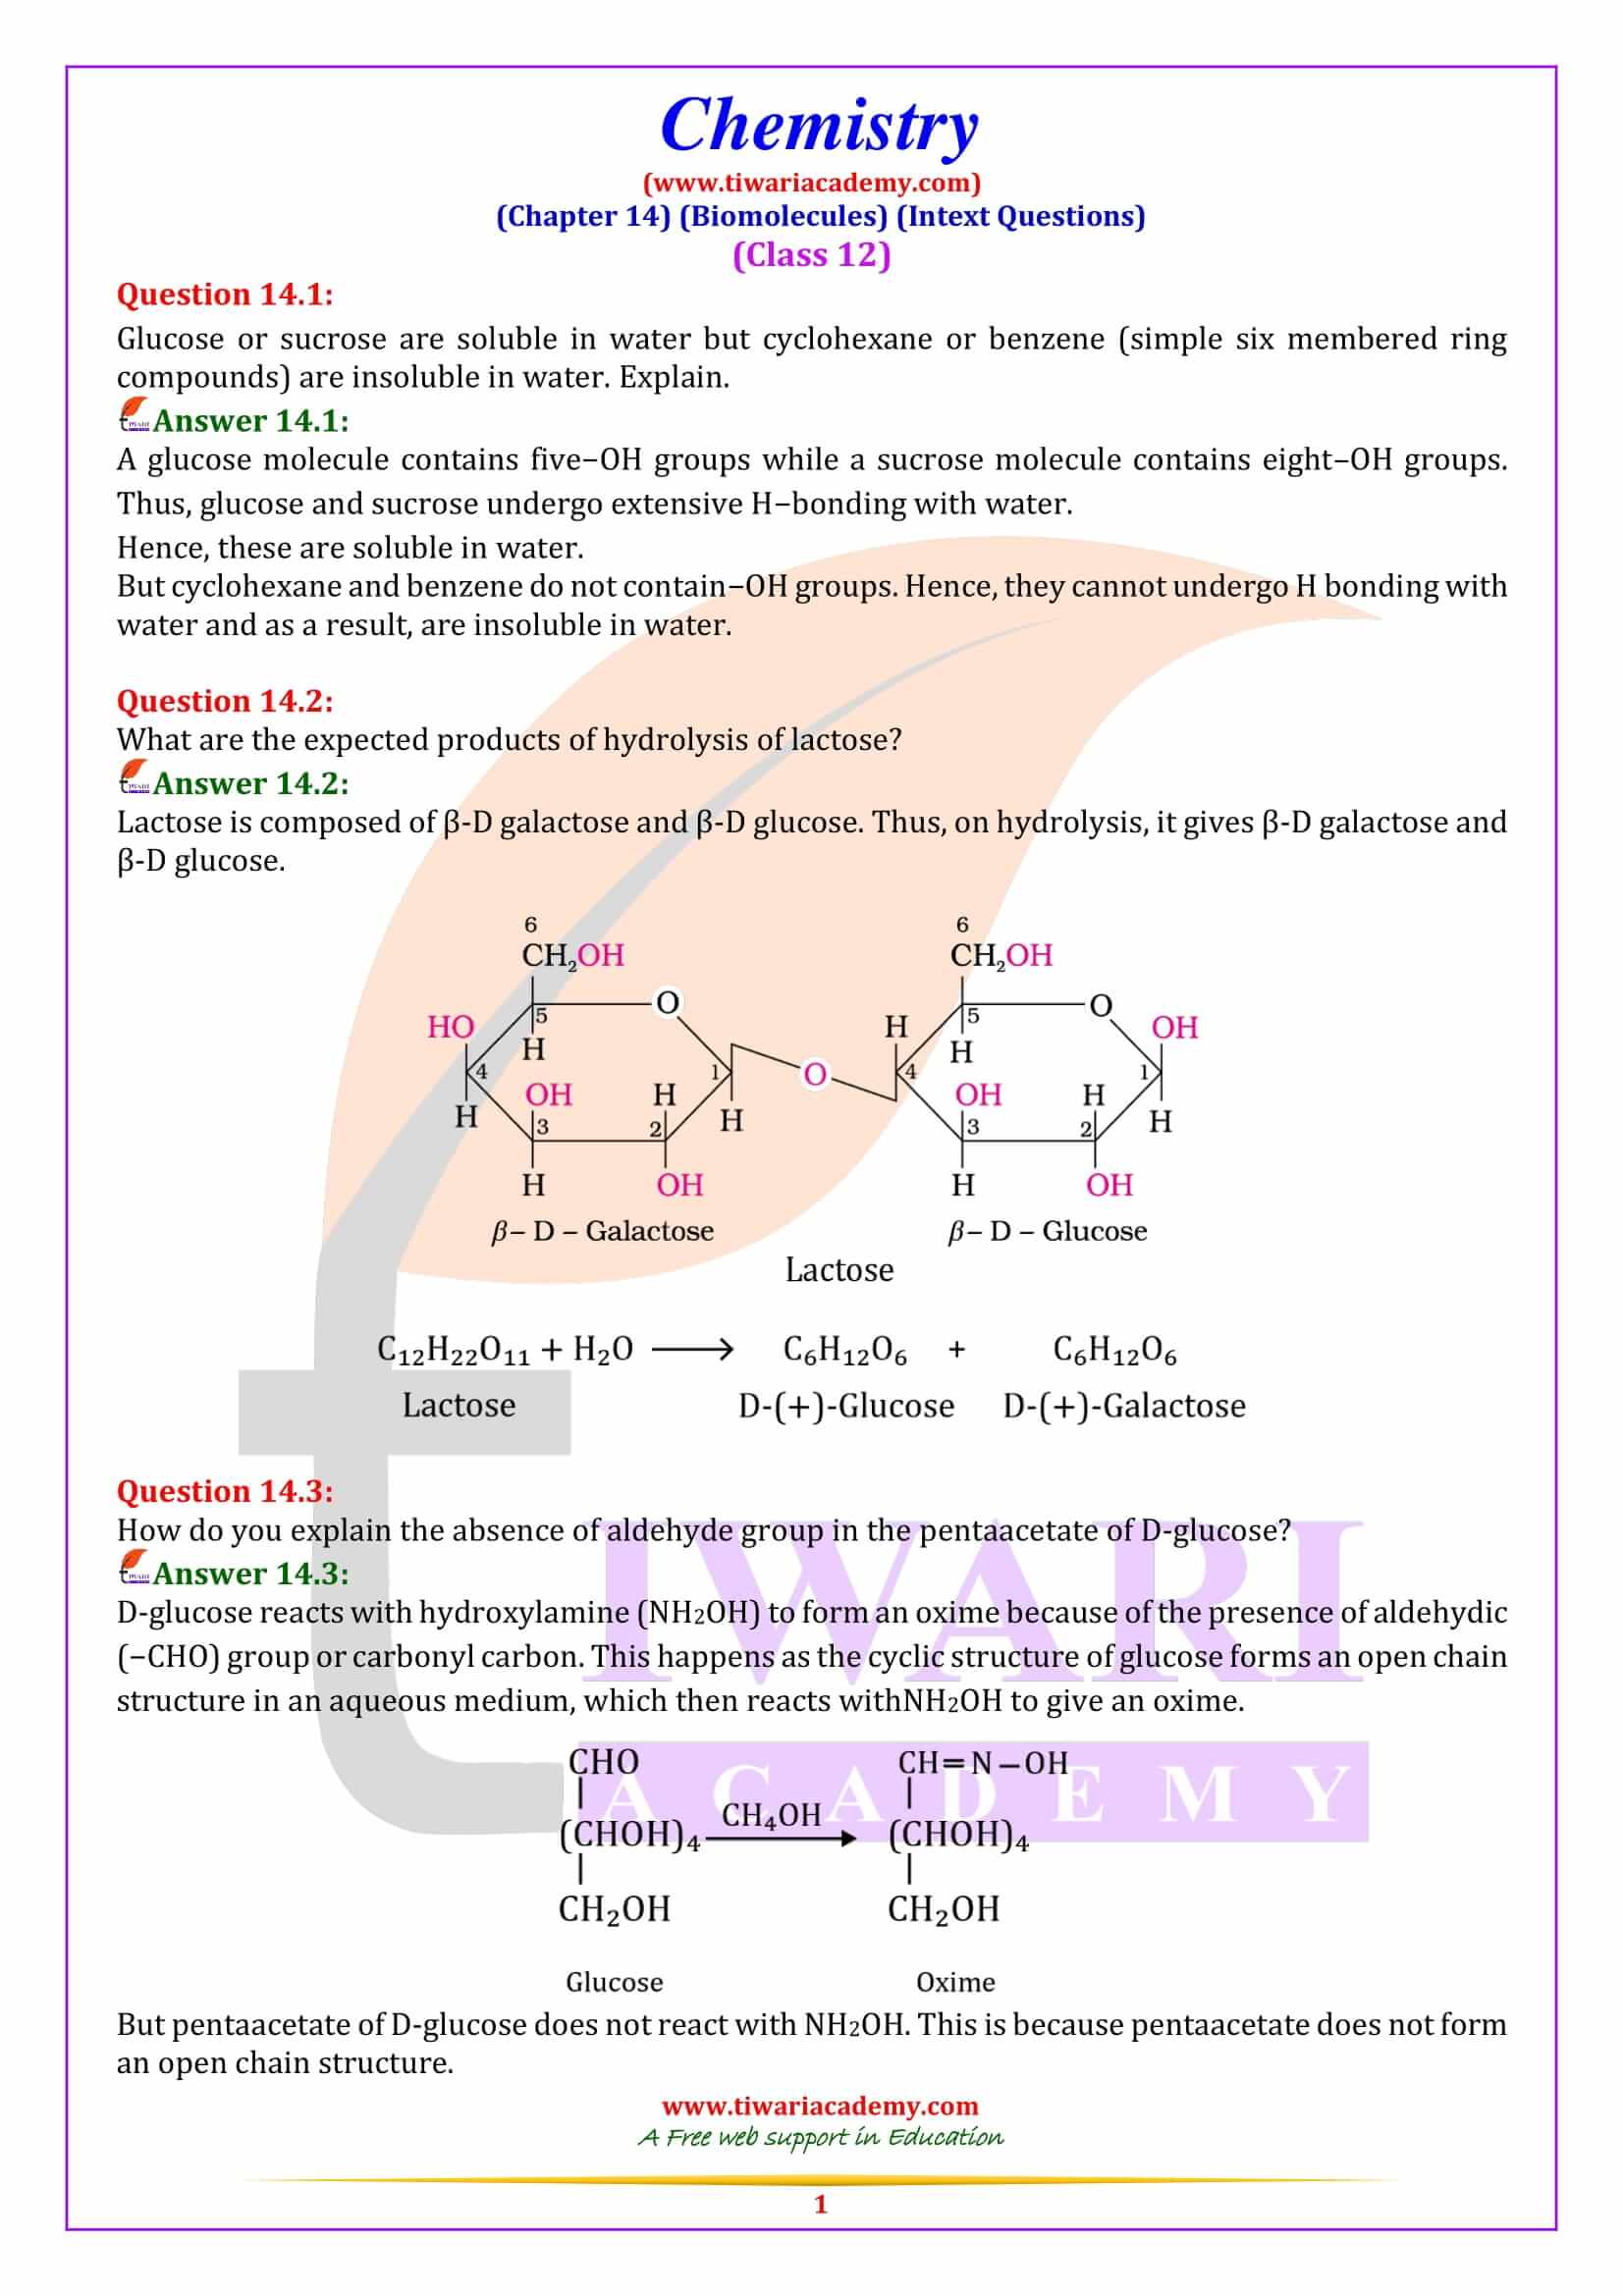 NCERT Solutions for Class 12 Chemistry Chapter 14 Intext